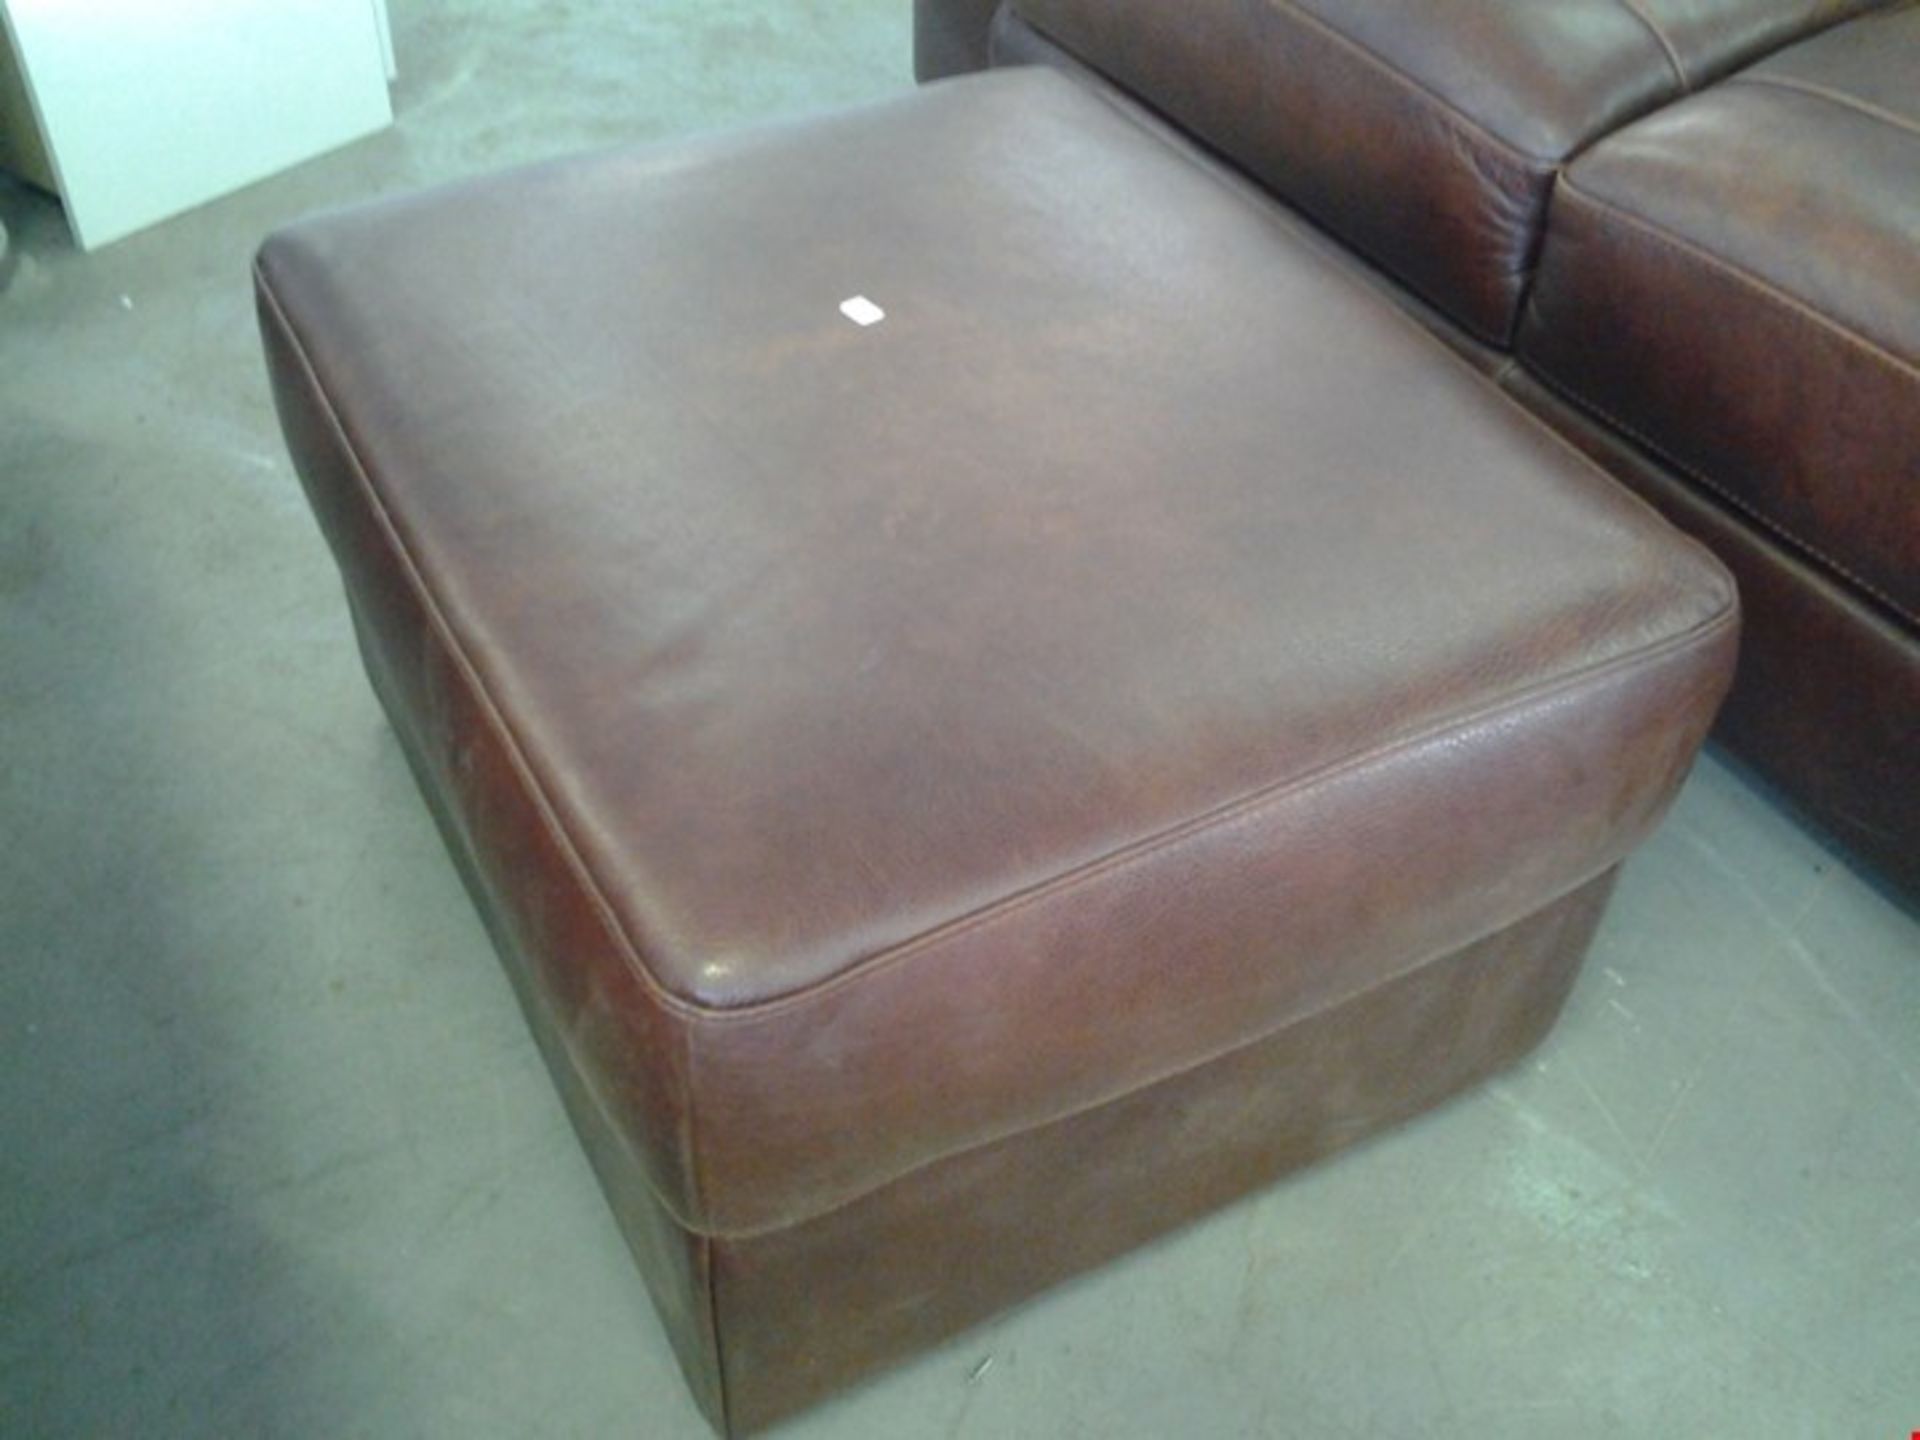 DESIGNER GUTTUSO BROWN ITALIAN LEATHER 3 SEATER SOFA, 2 SEATER SOFA AND STORAGE FOOTSTOOL - Image 4 of 4